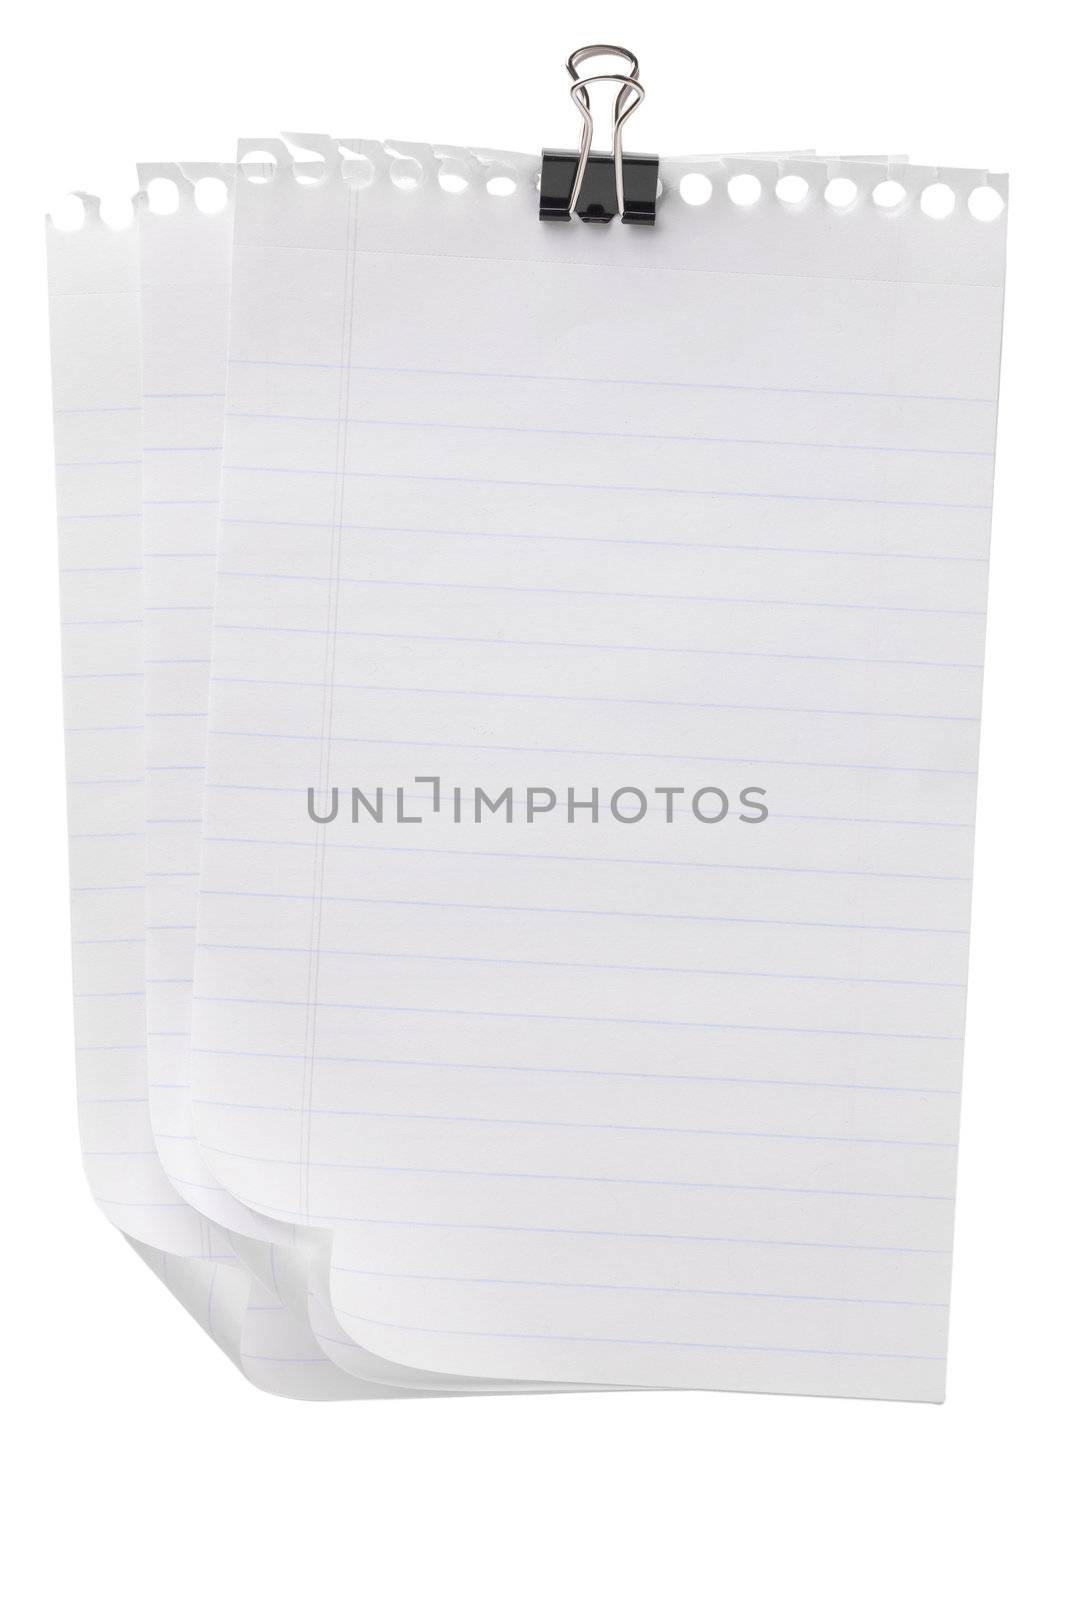 Few pieces of notebook paper with clip on a close up image